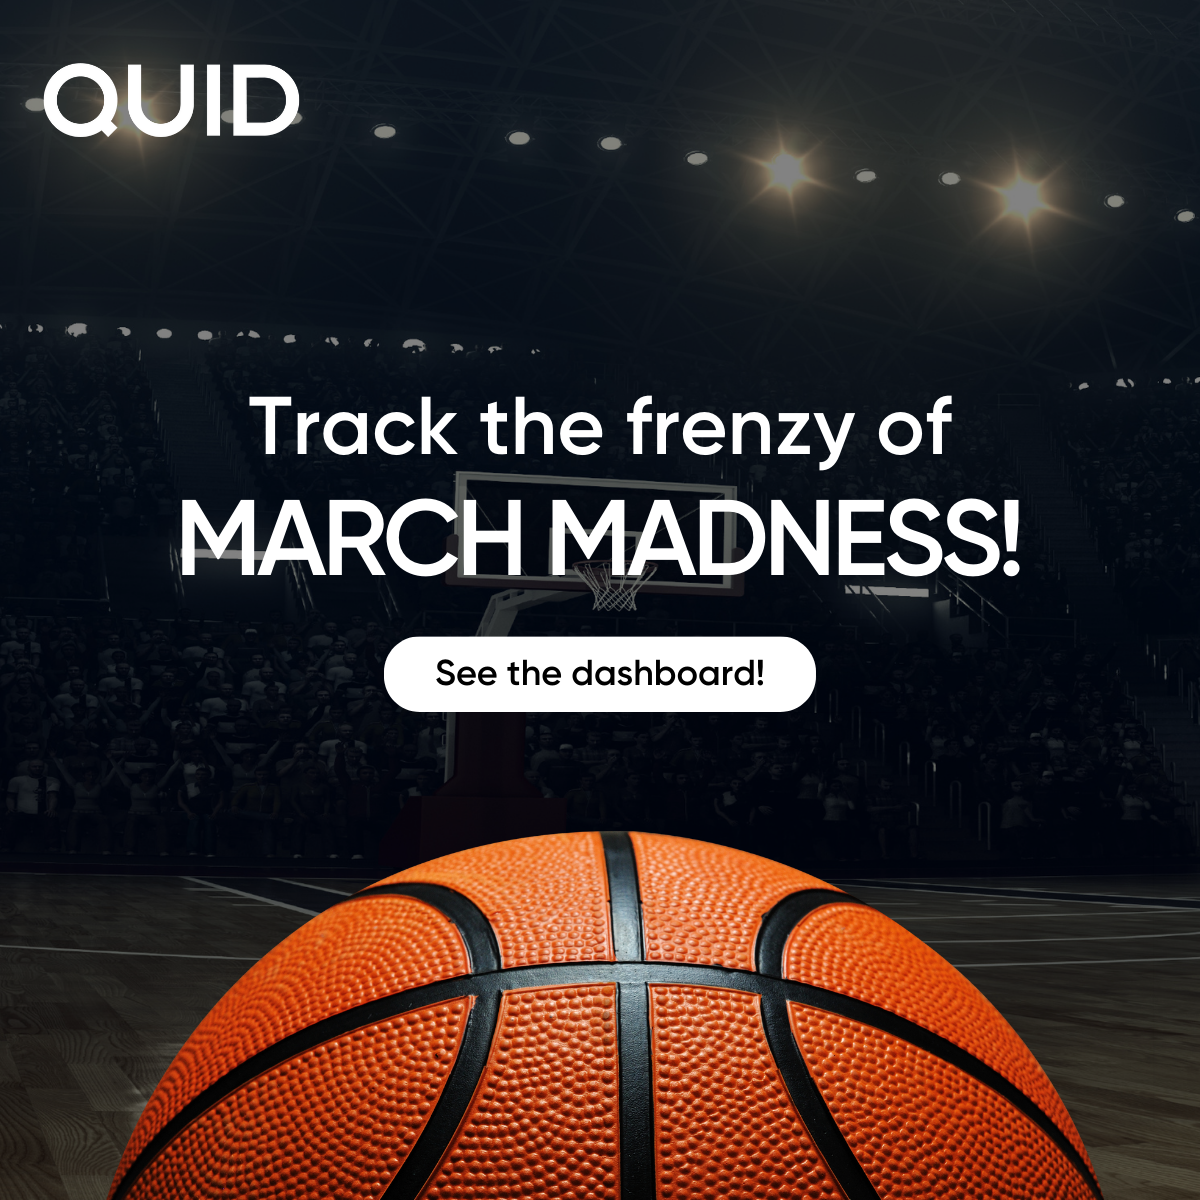 FY25 - Q1 - Quid Suite Campaign - March Madness - LinkedIn TEAM Posts (1200 x 1200 px) (2)